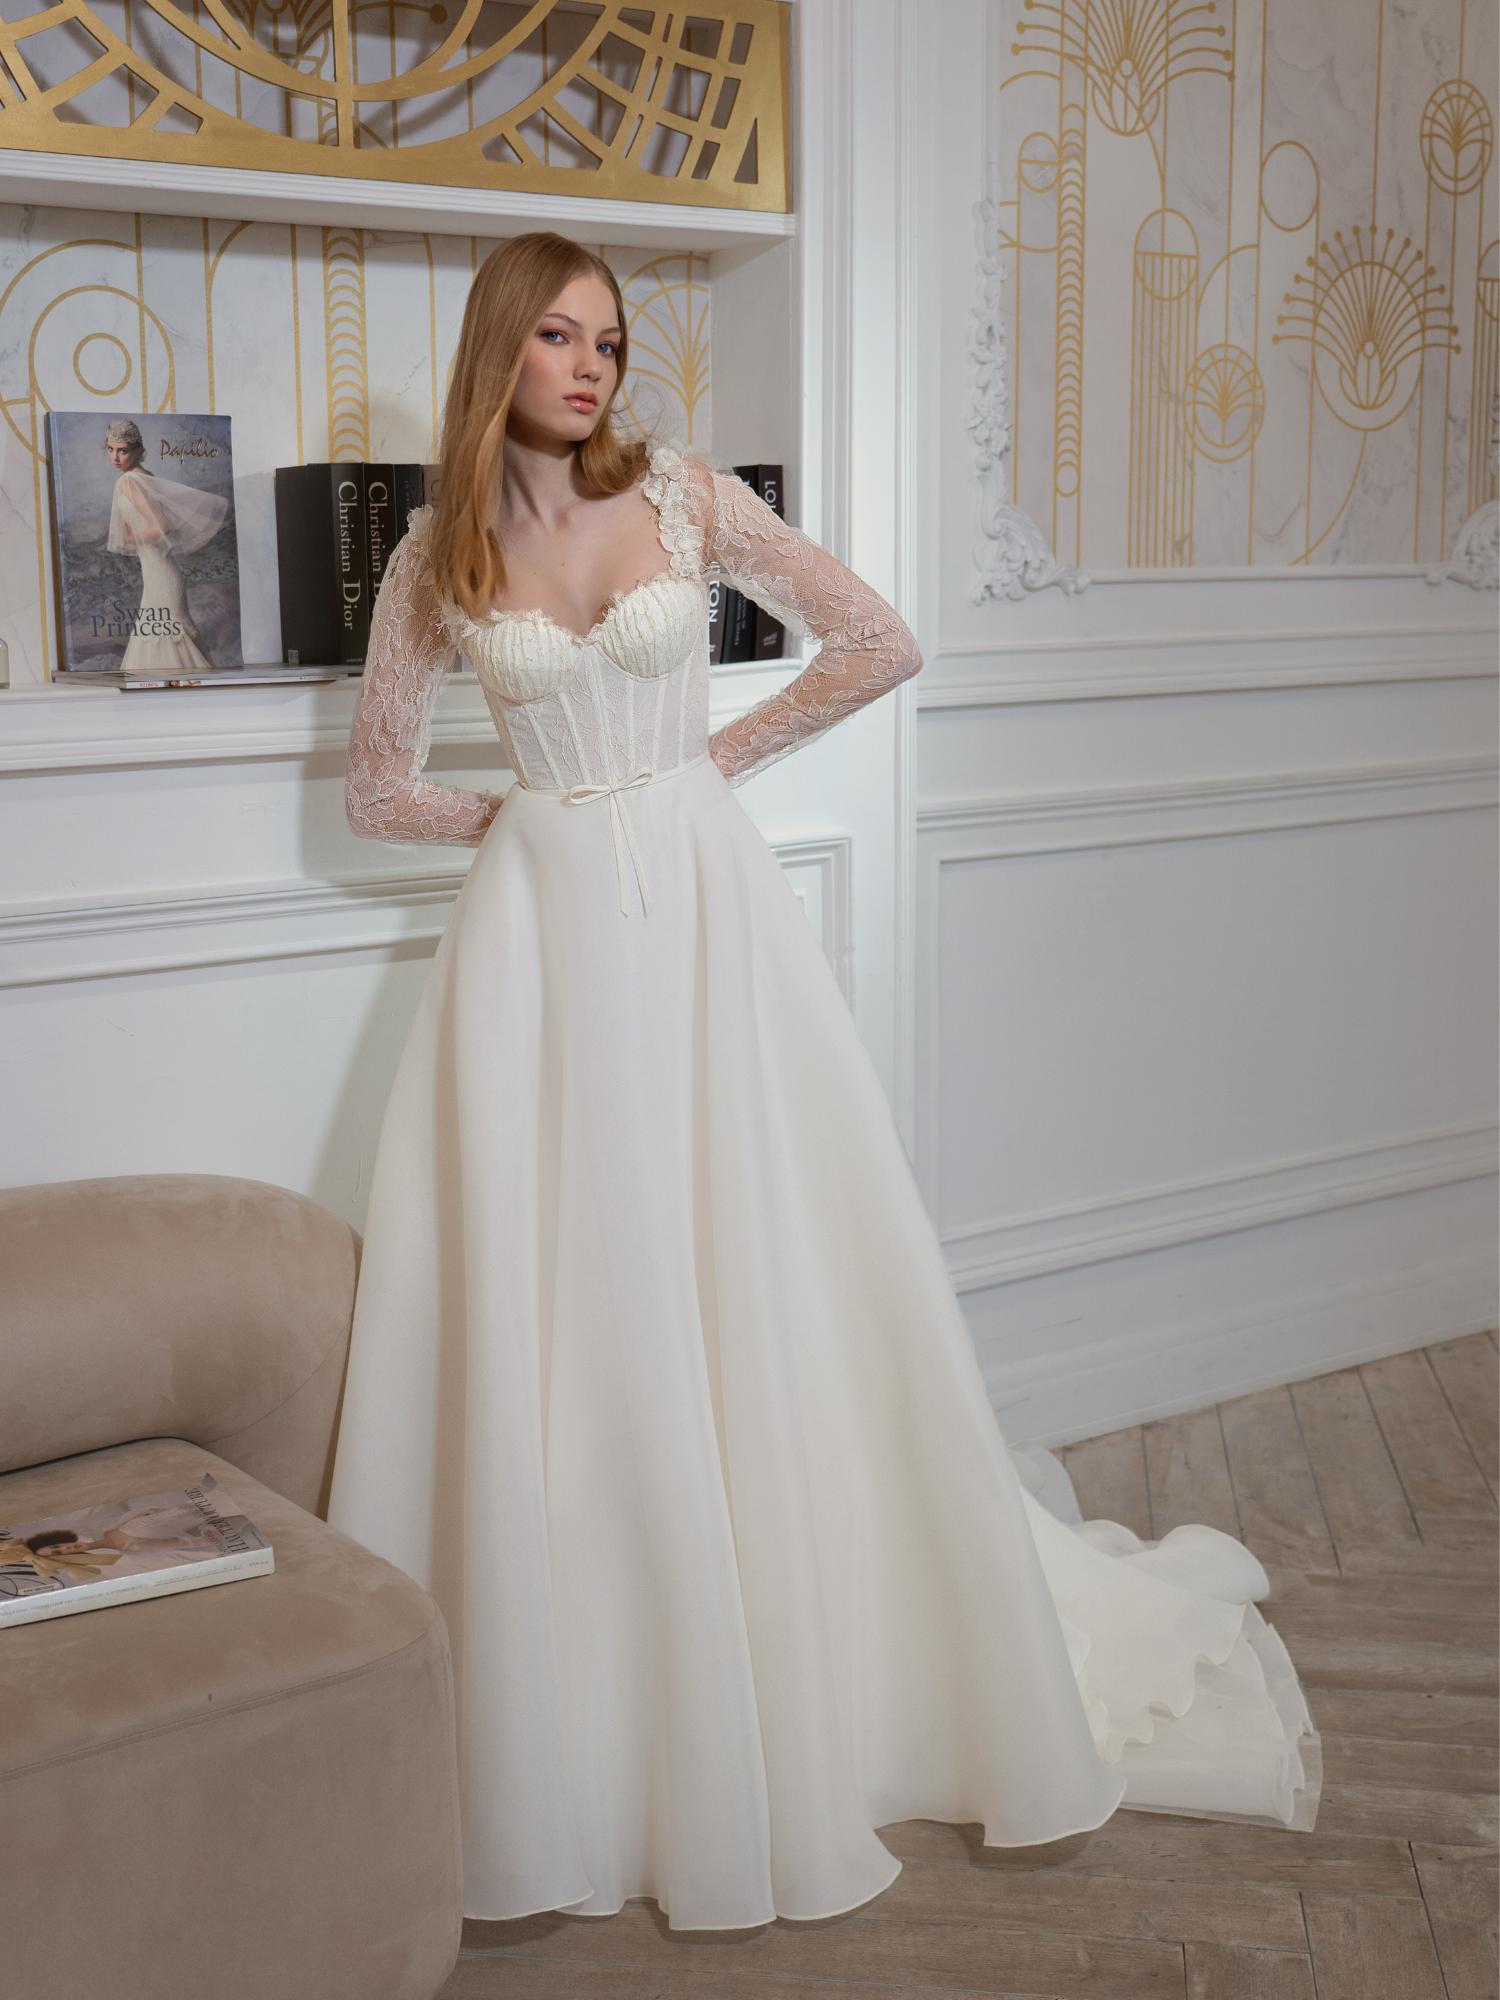 Organza A-line wedding dress with long lace sleeves